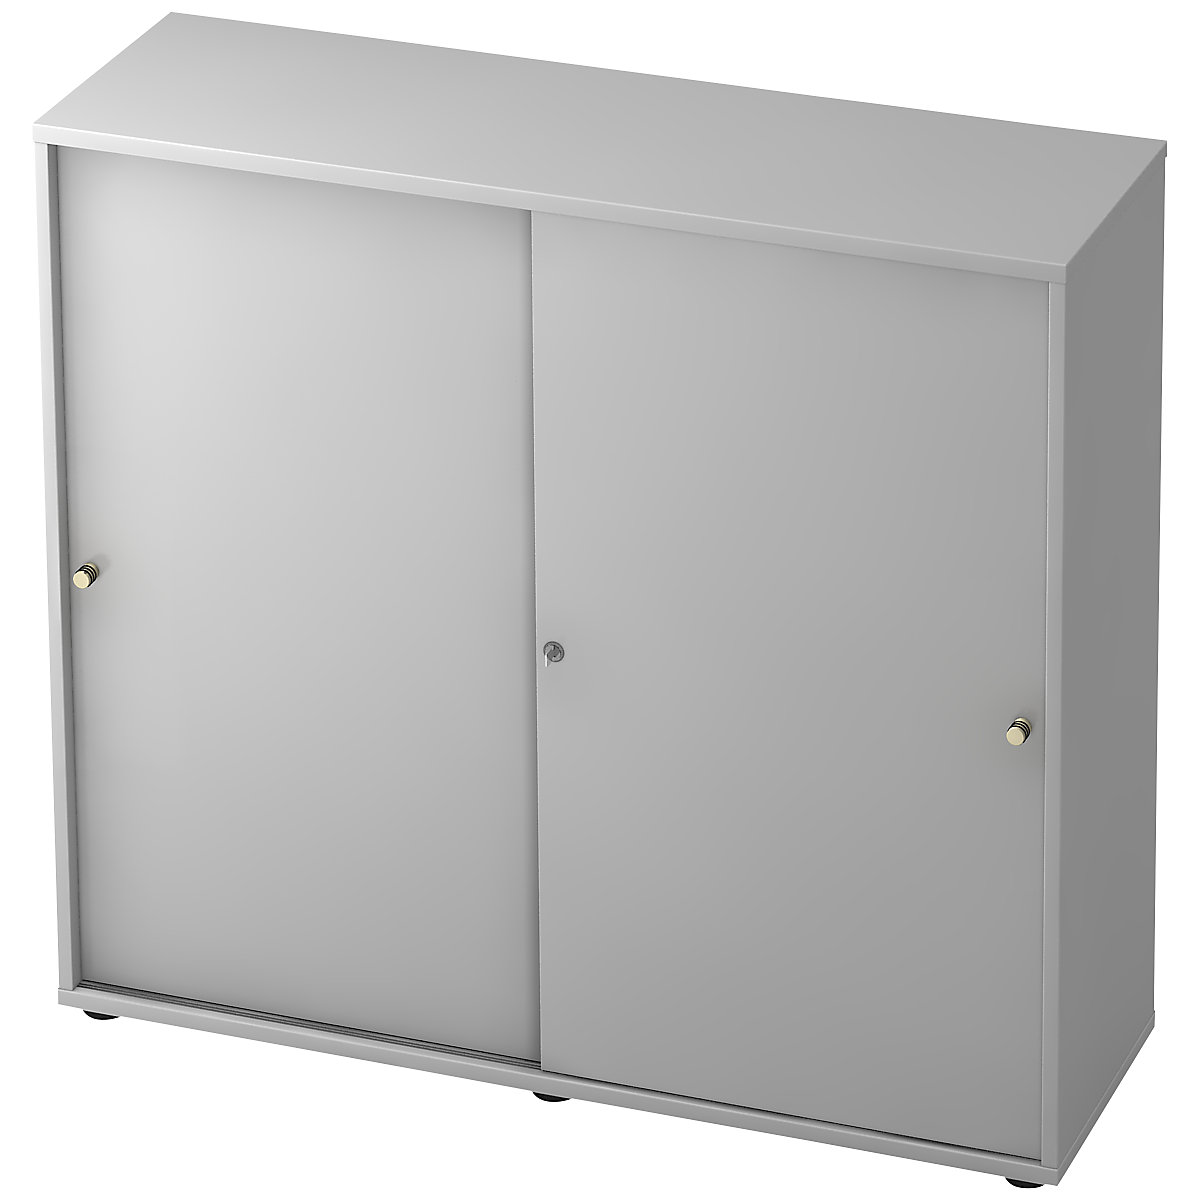 Sliding door cupboard with acoustic rear panel ANNY-AC, 2 shelves, centre partition, light grey-8